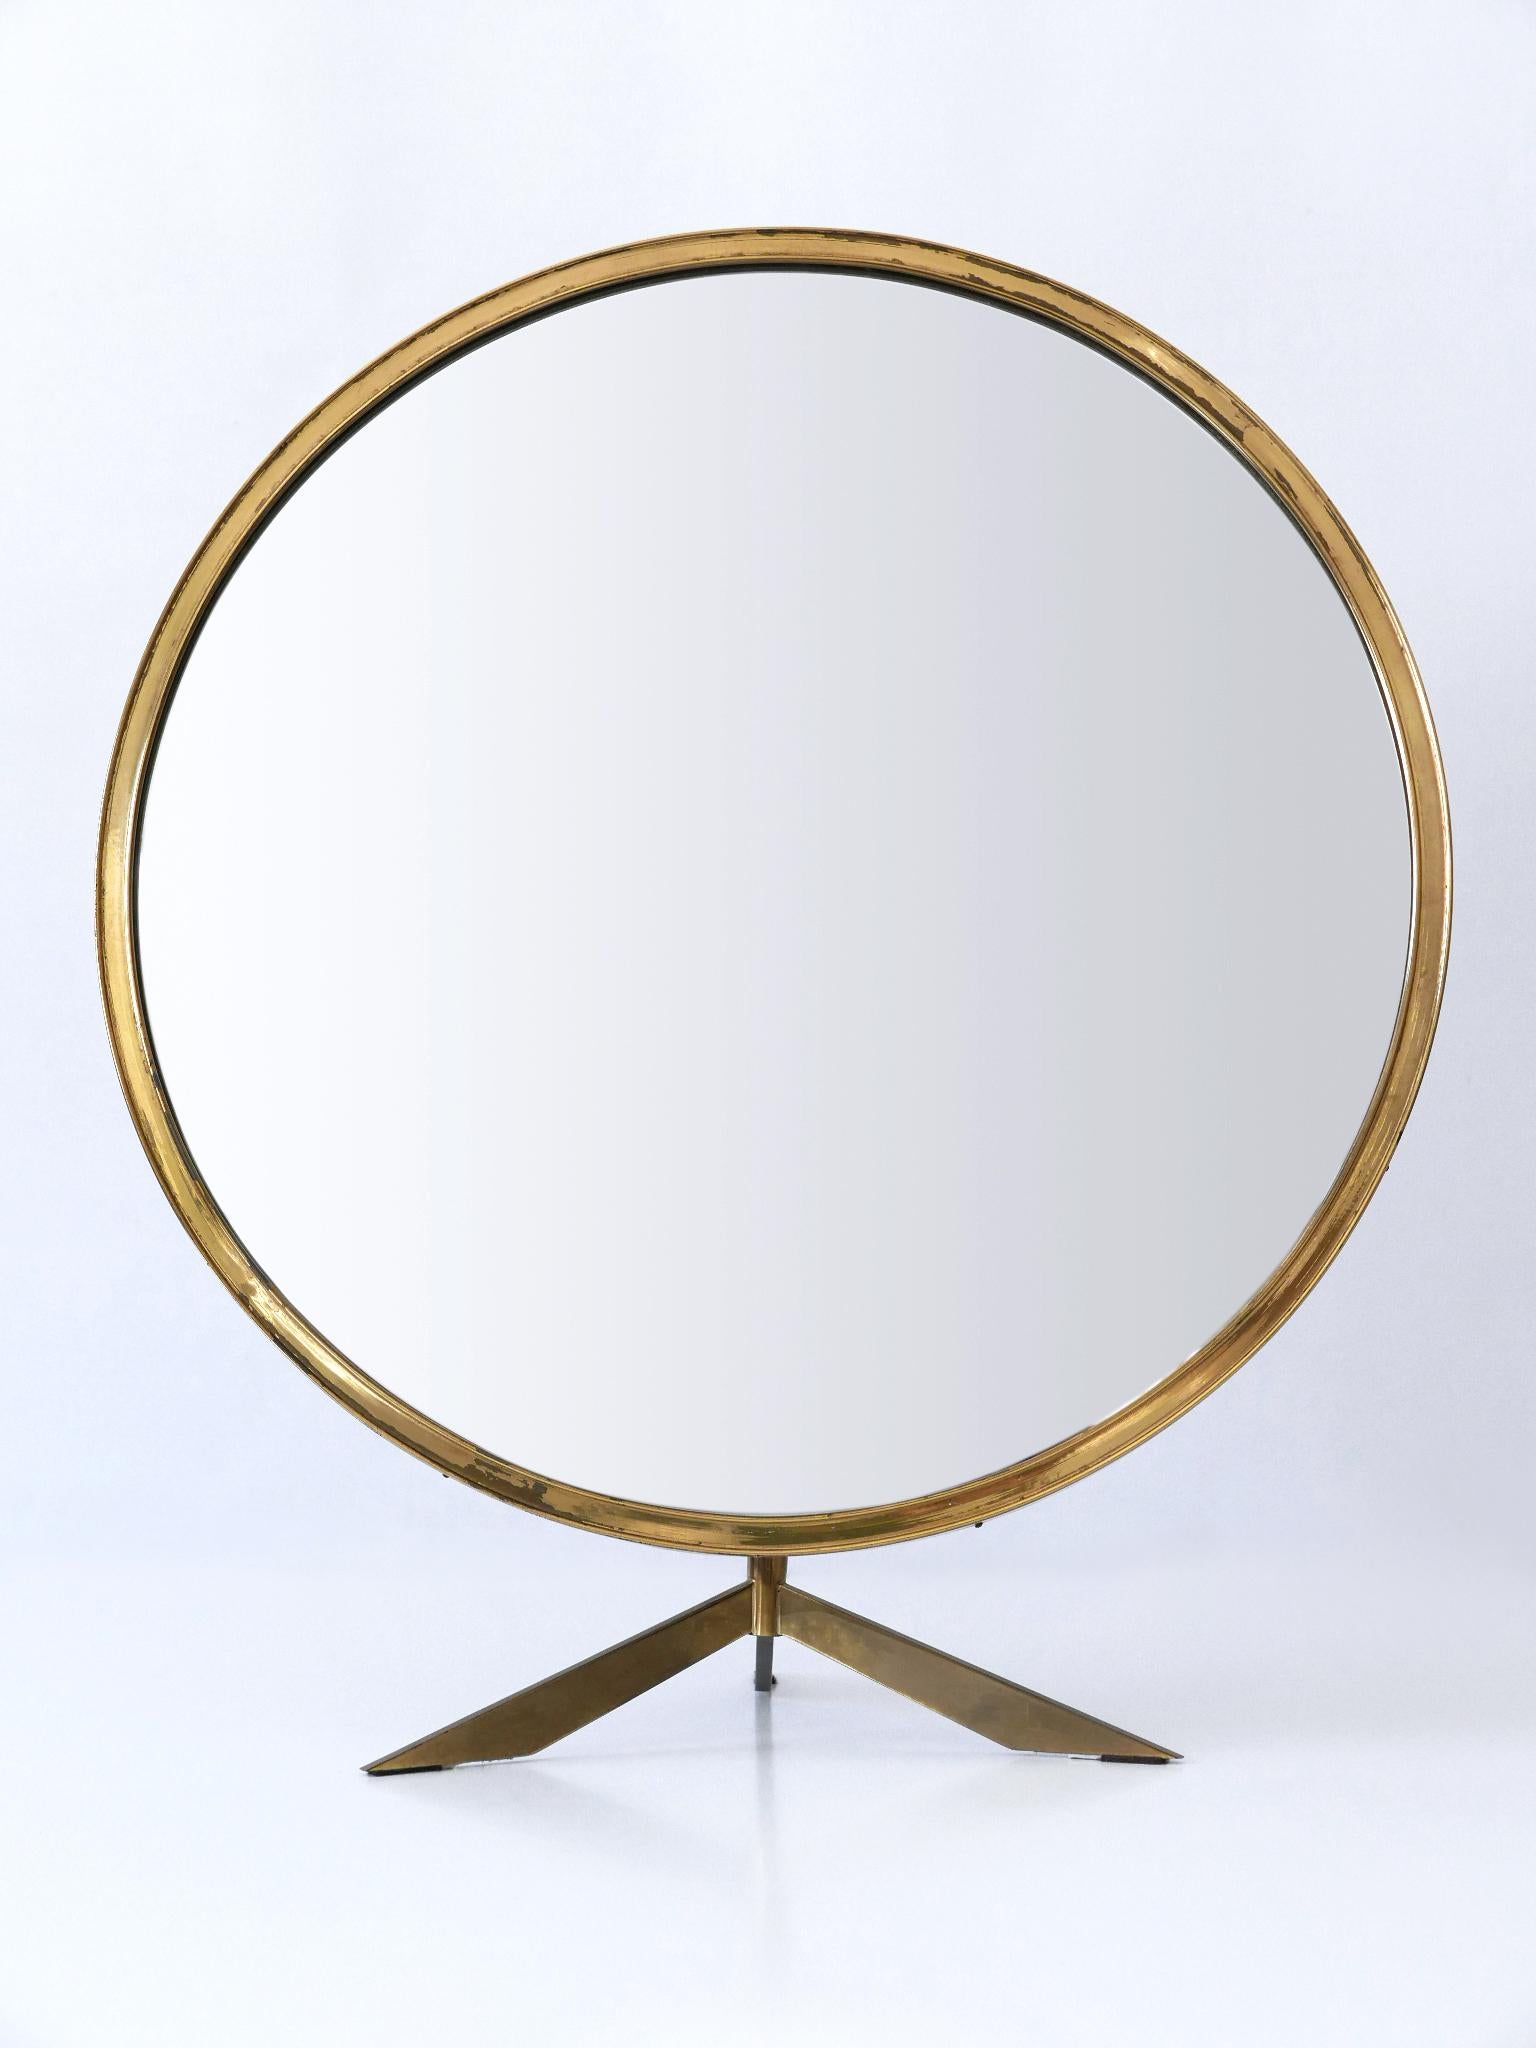 Rare and elegant Mid-Century Modern table / wall mirror with elegant brass and foot. Adjustable angle if used as table mirror. Manufactured by Münchner Zierform, Germany, 1950s.

Executed in mirror glass, brass and plywood.

Condition:
Good original